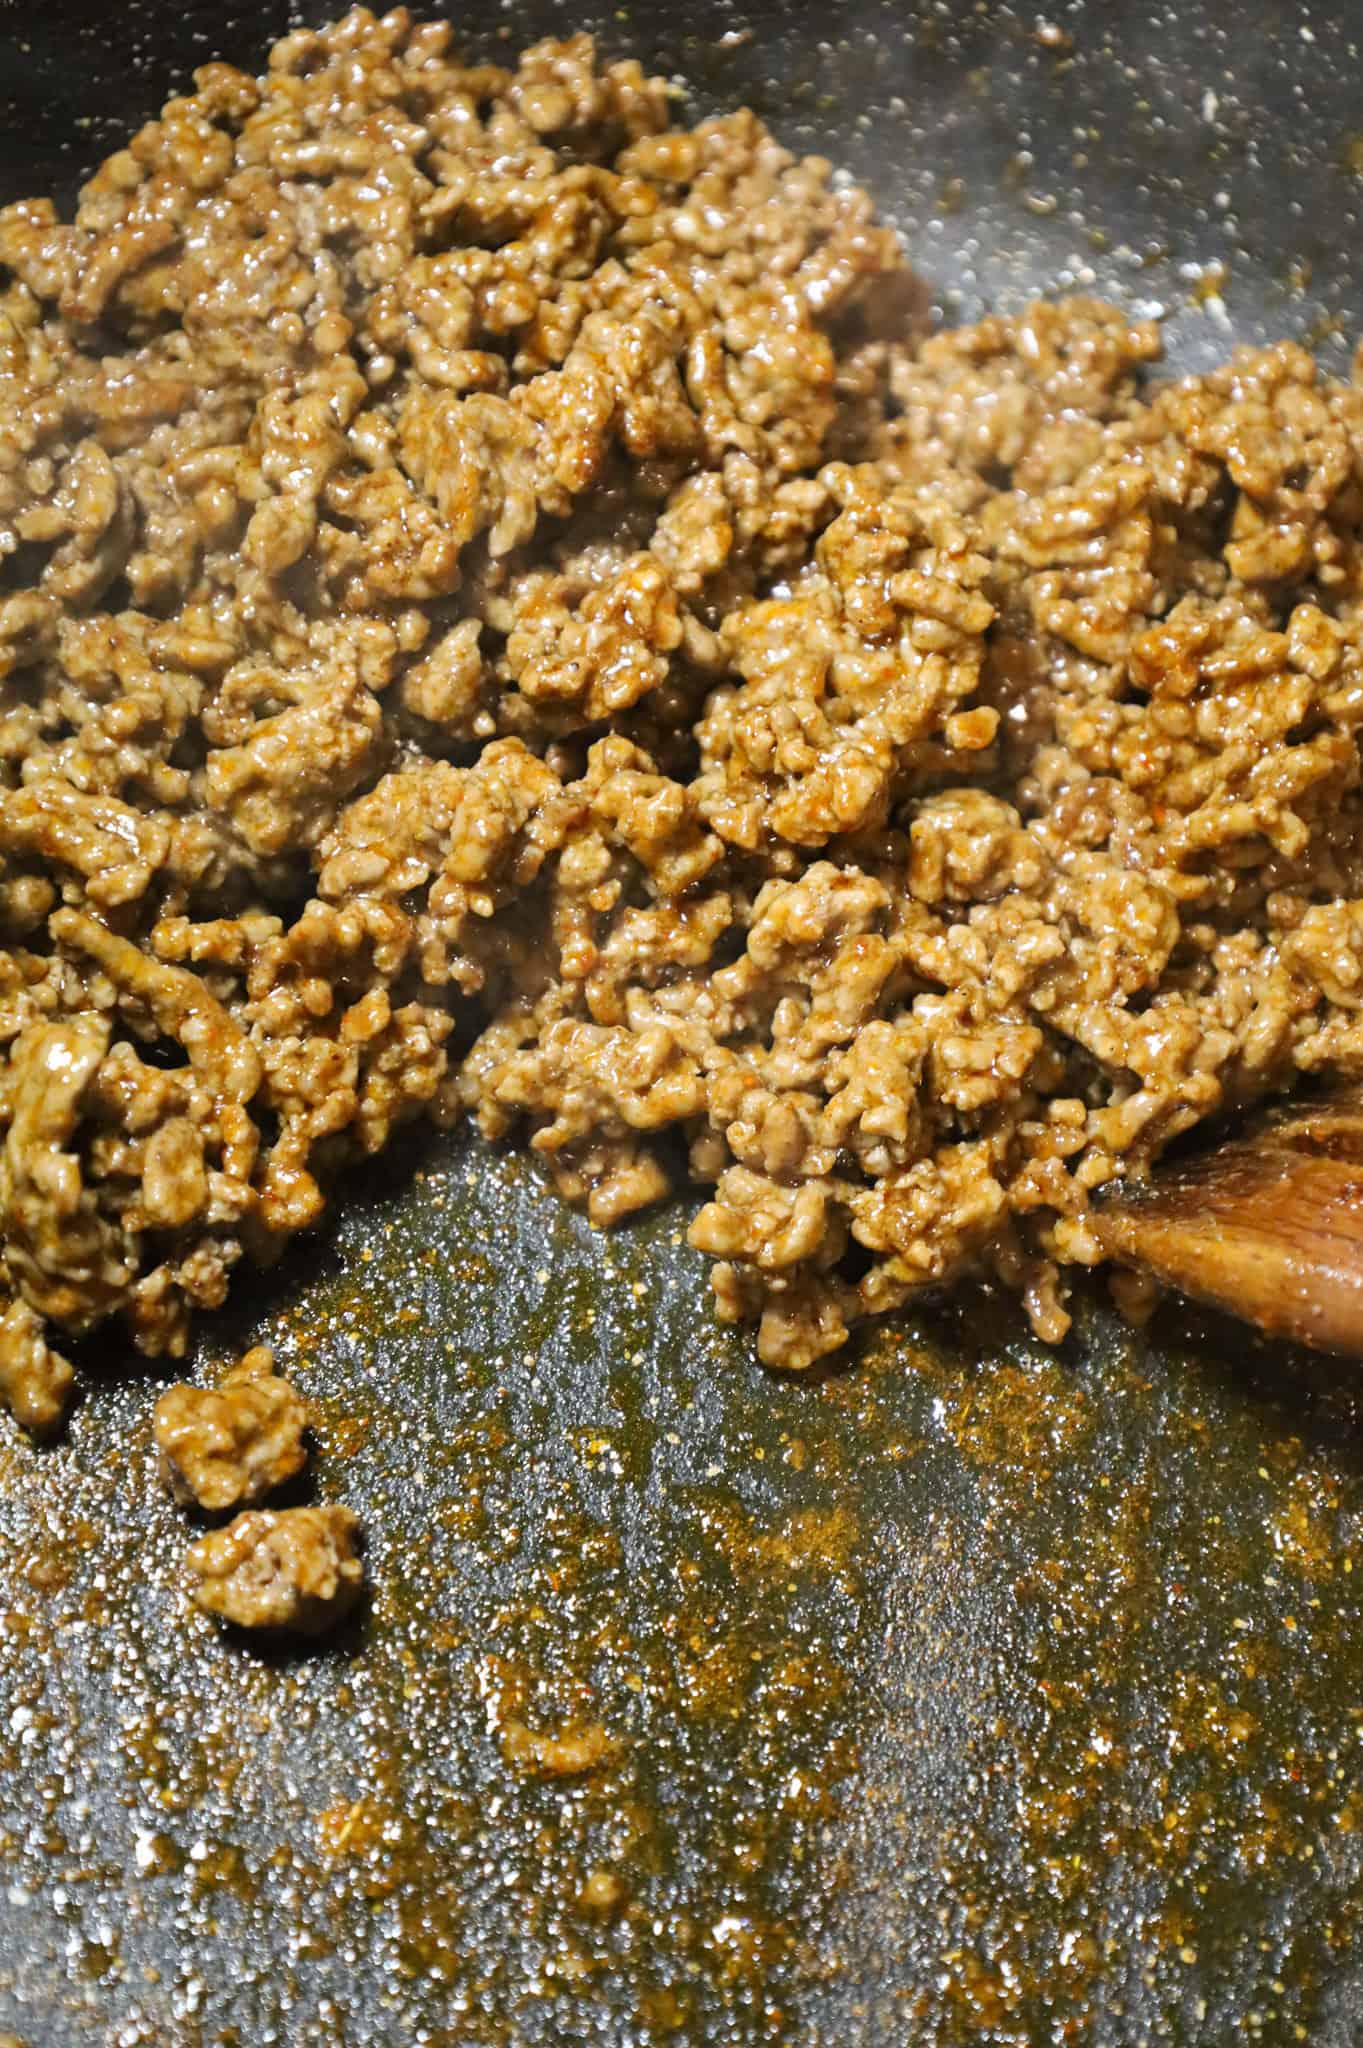 cooked ground beef coated in a taco seasoning in a skillet